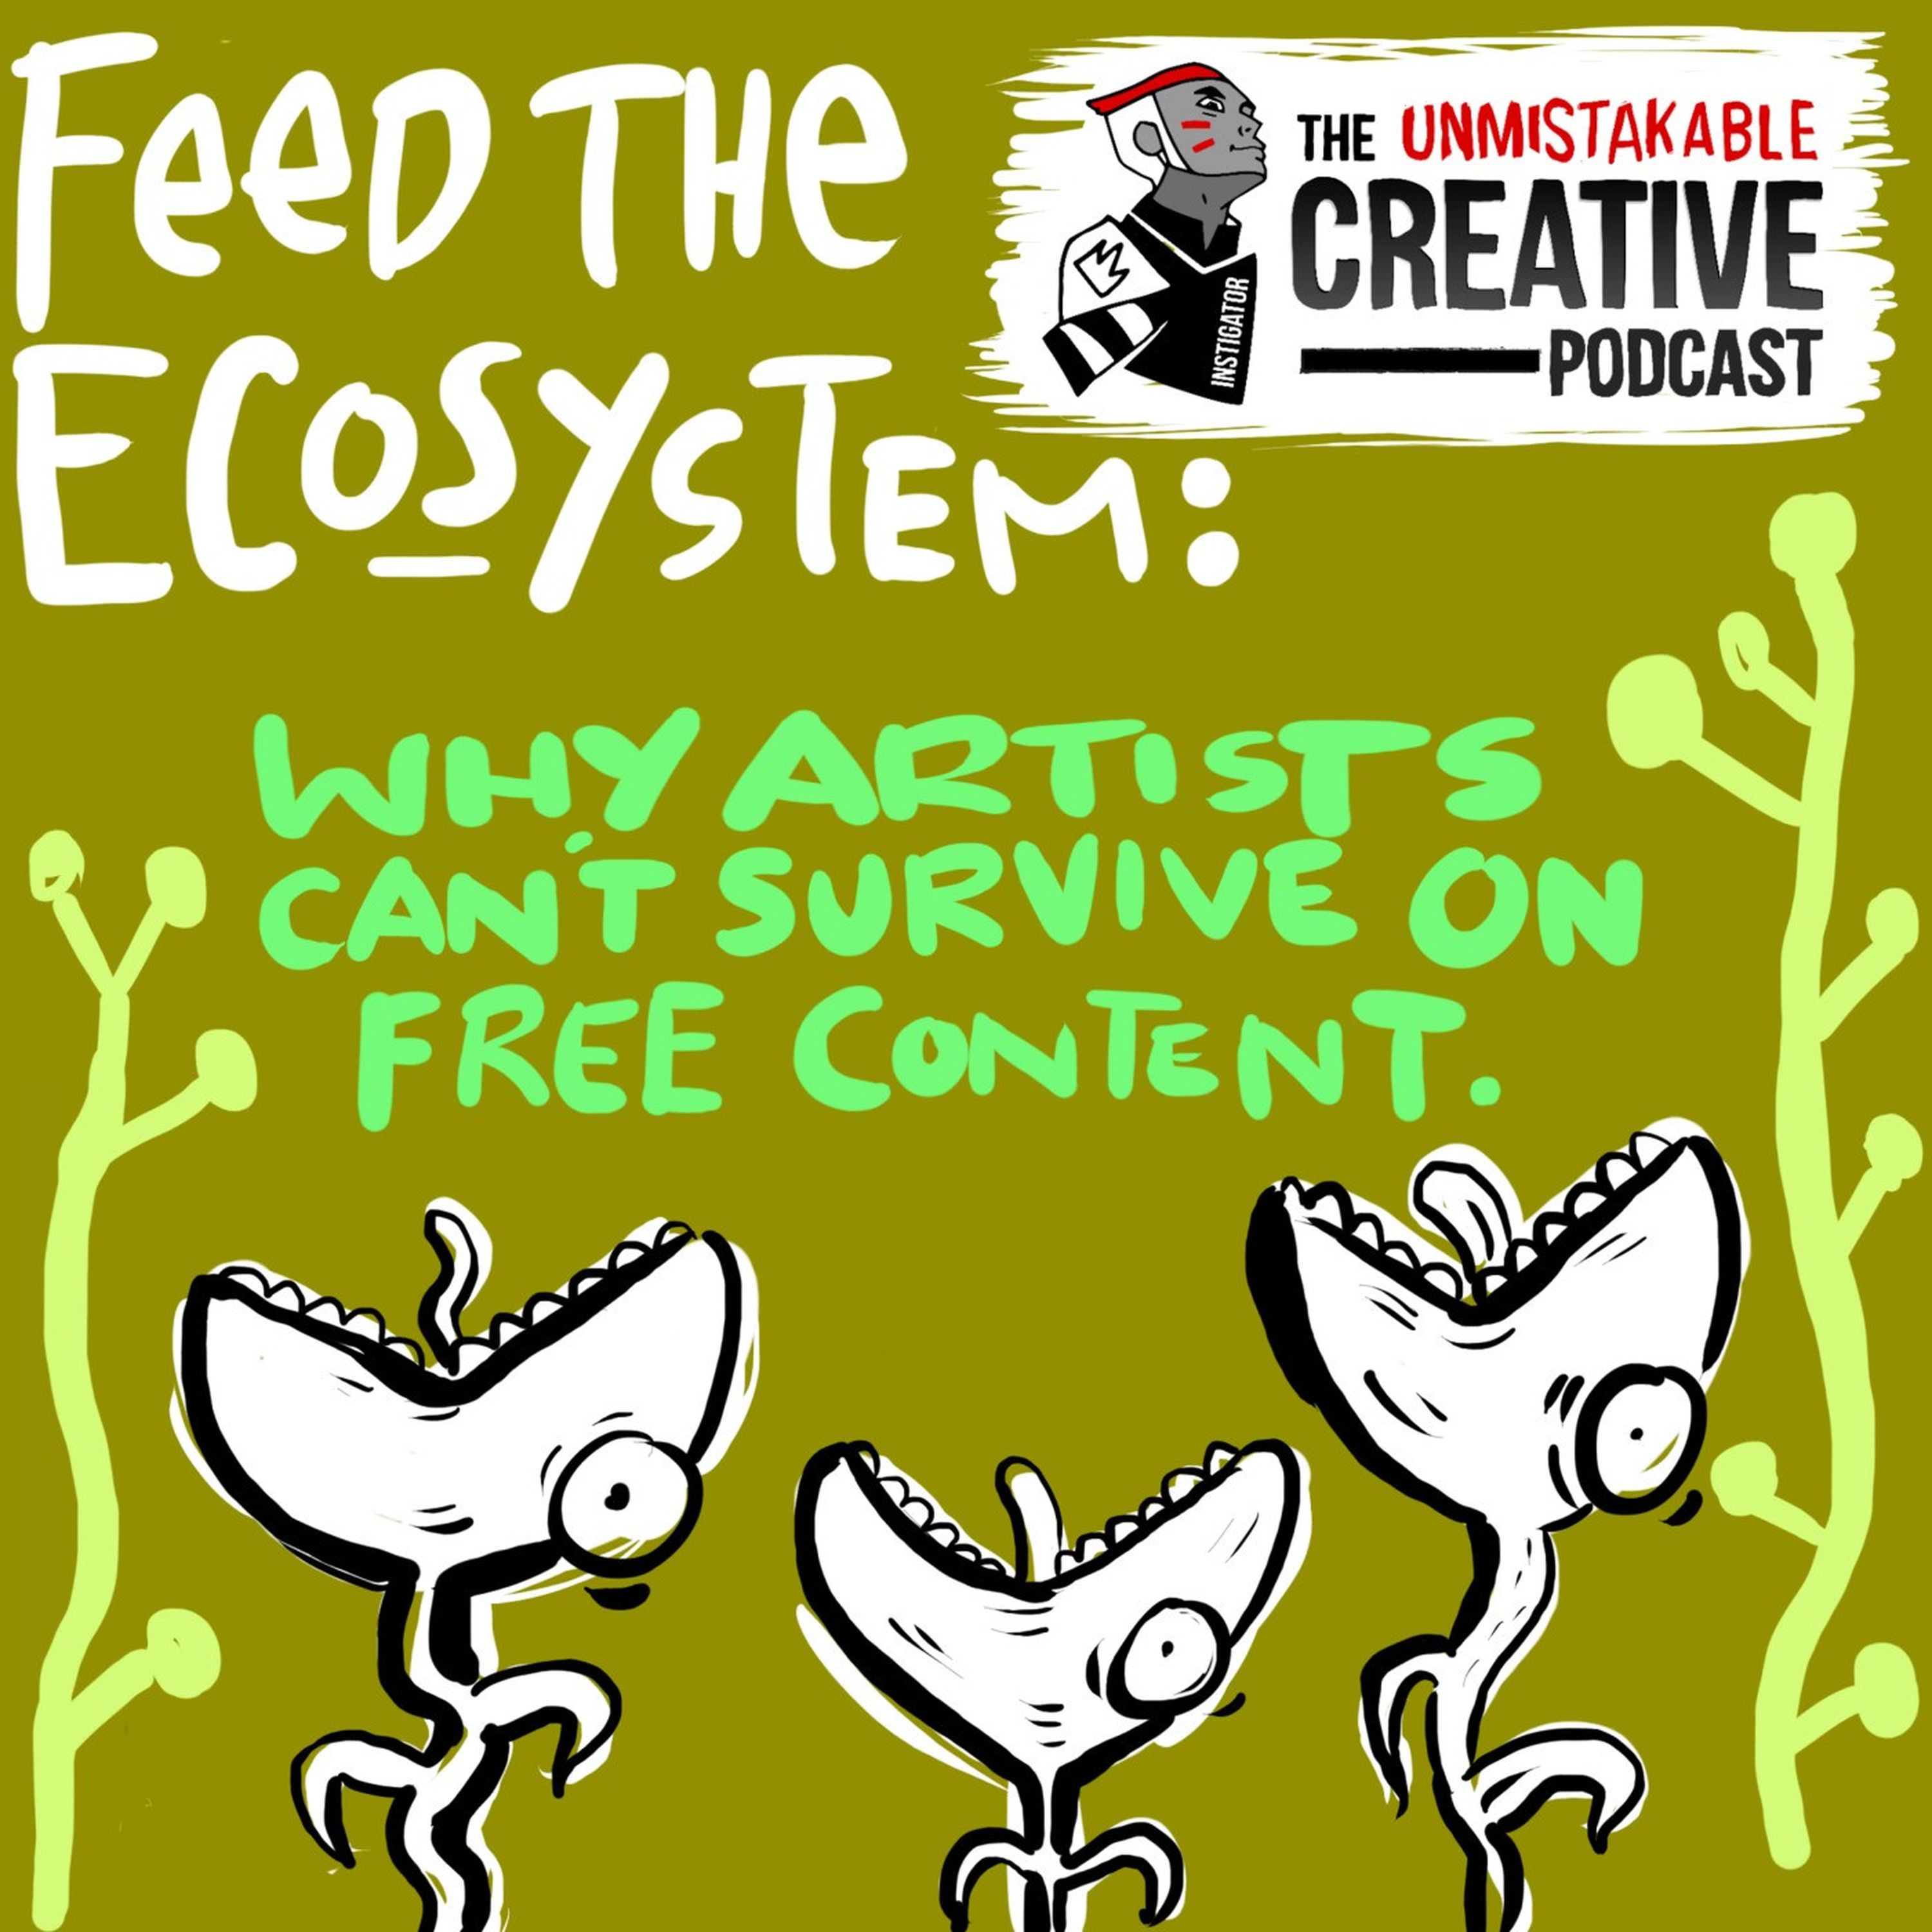 Feed The Ecosystem: Why Artists Can’t Survive on Free Content Image